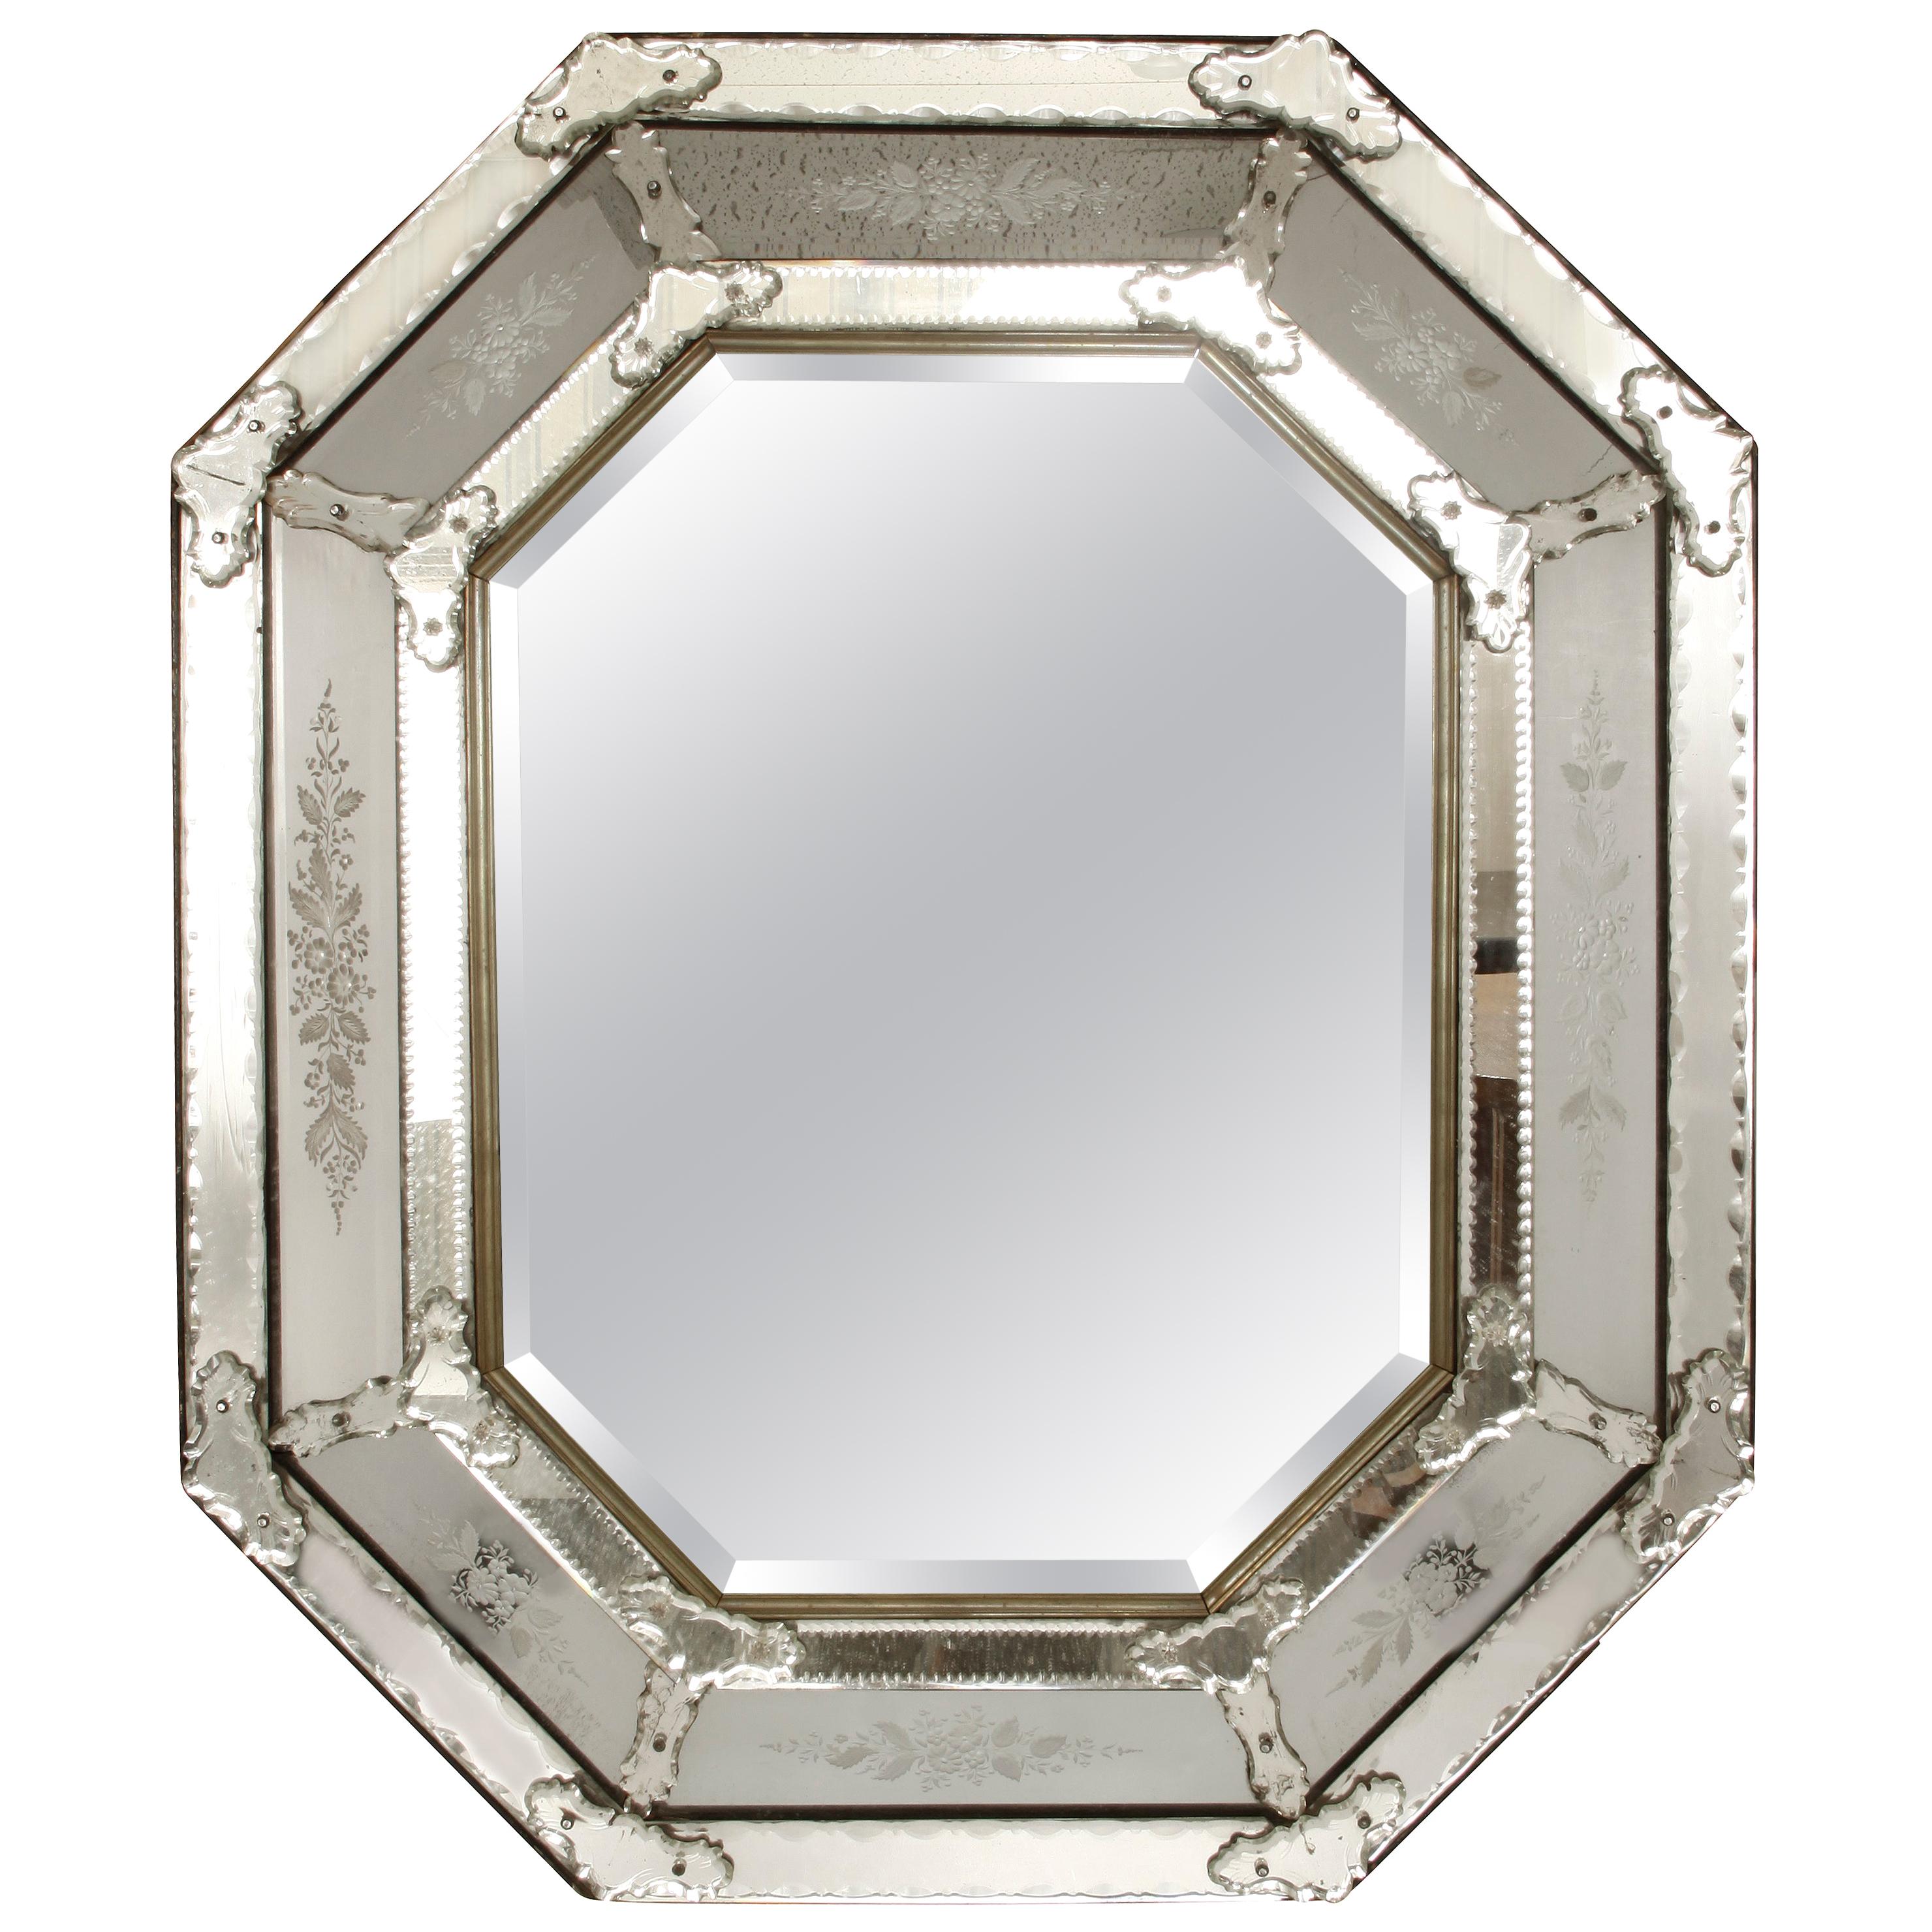 Italian Venetian Mirror with Etched Details